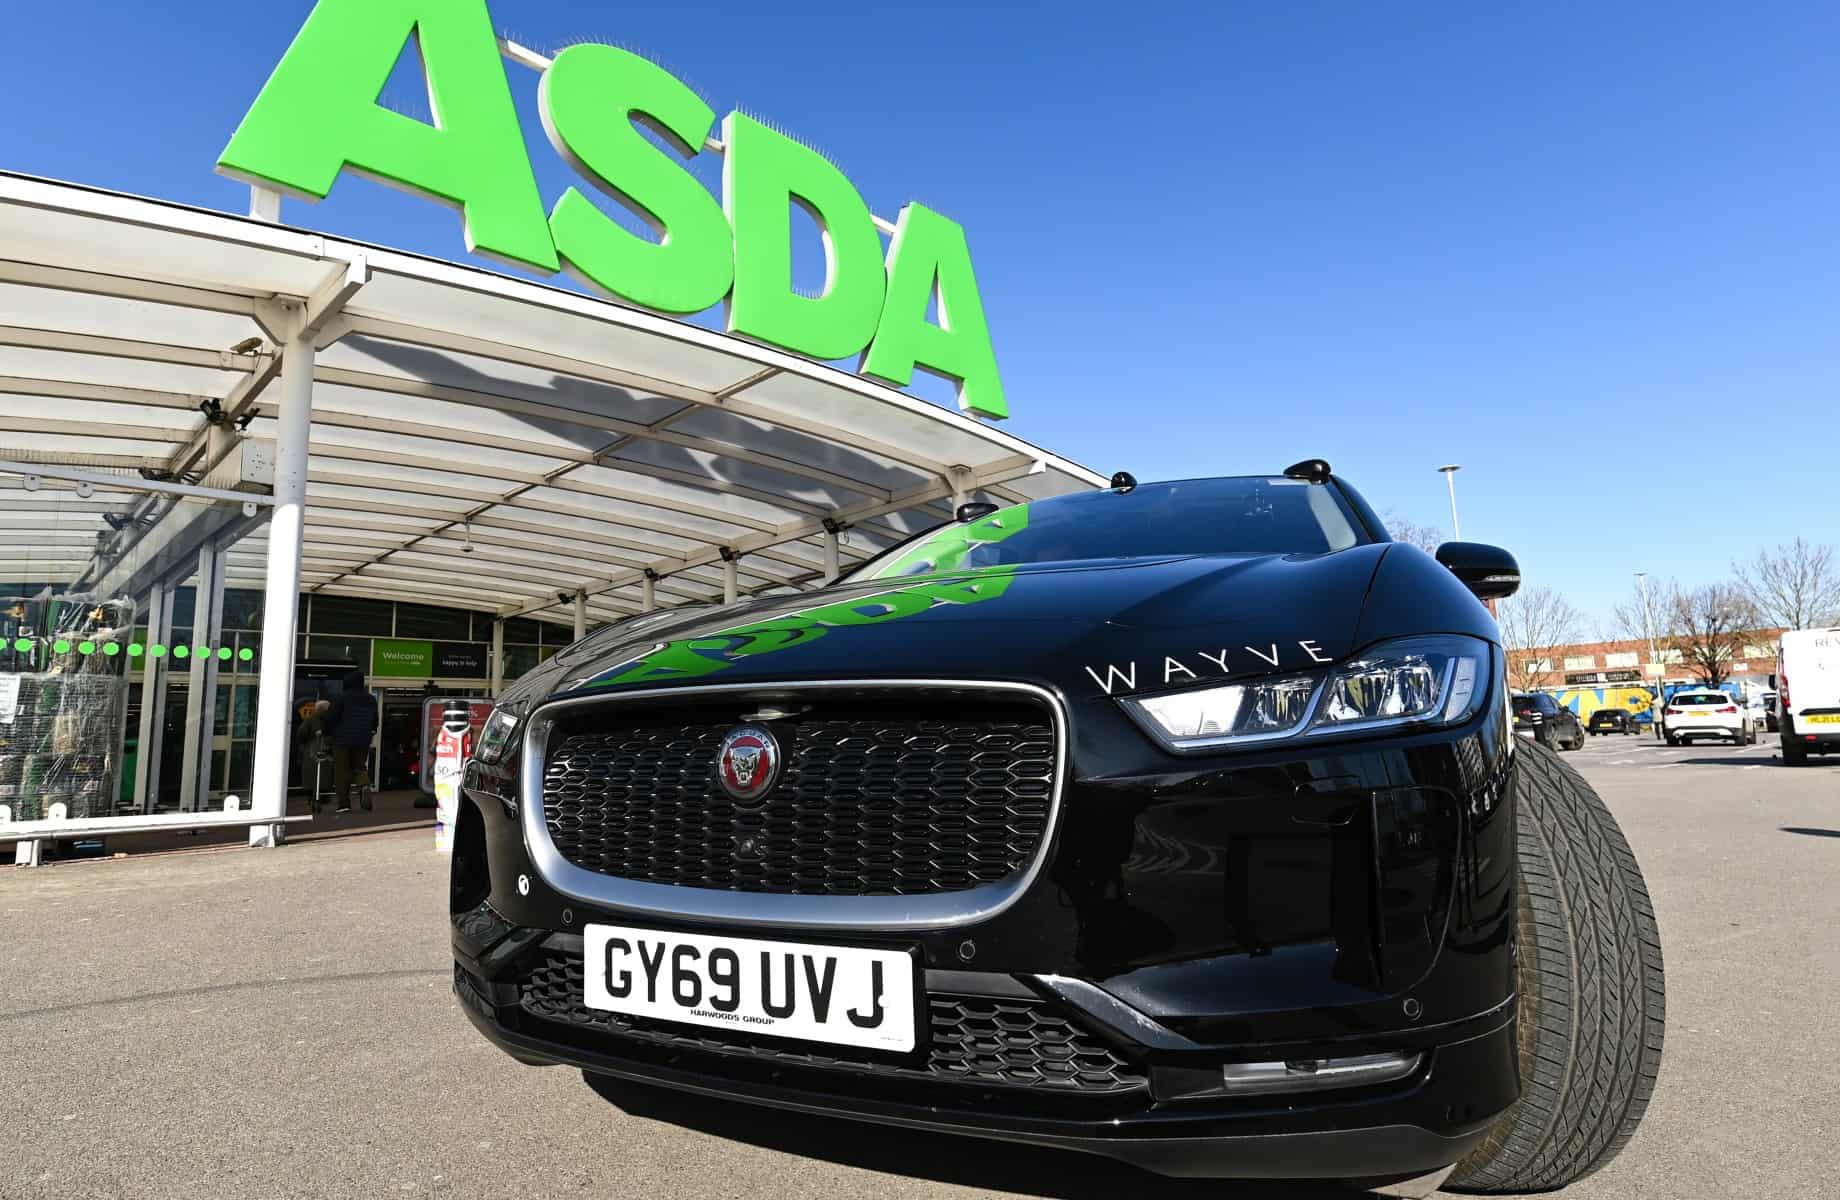 Asda driverless delivery